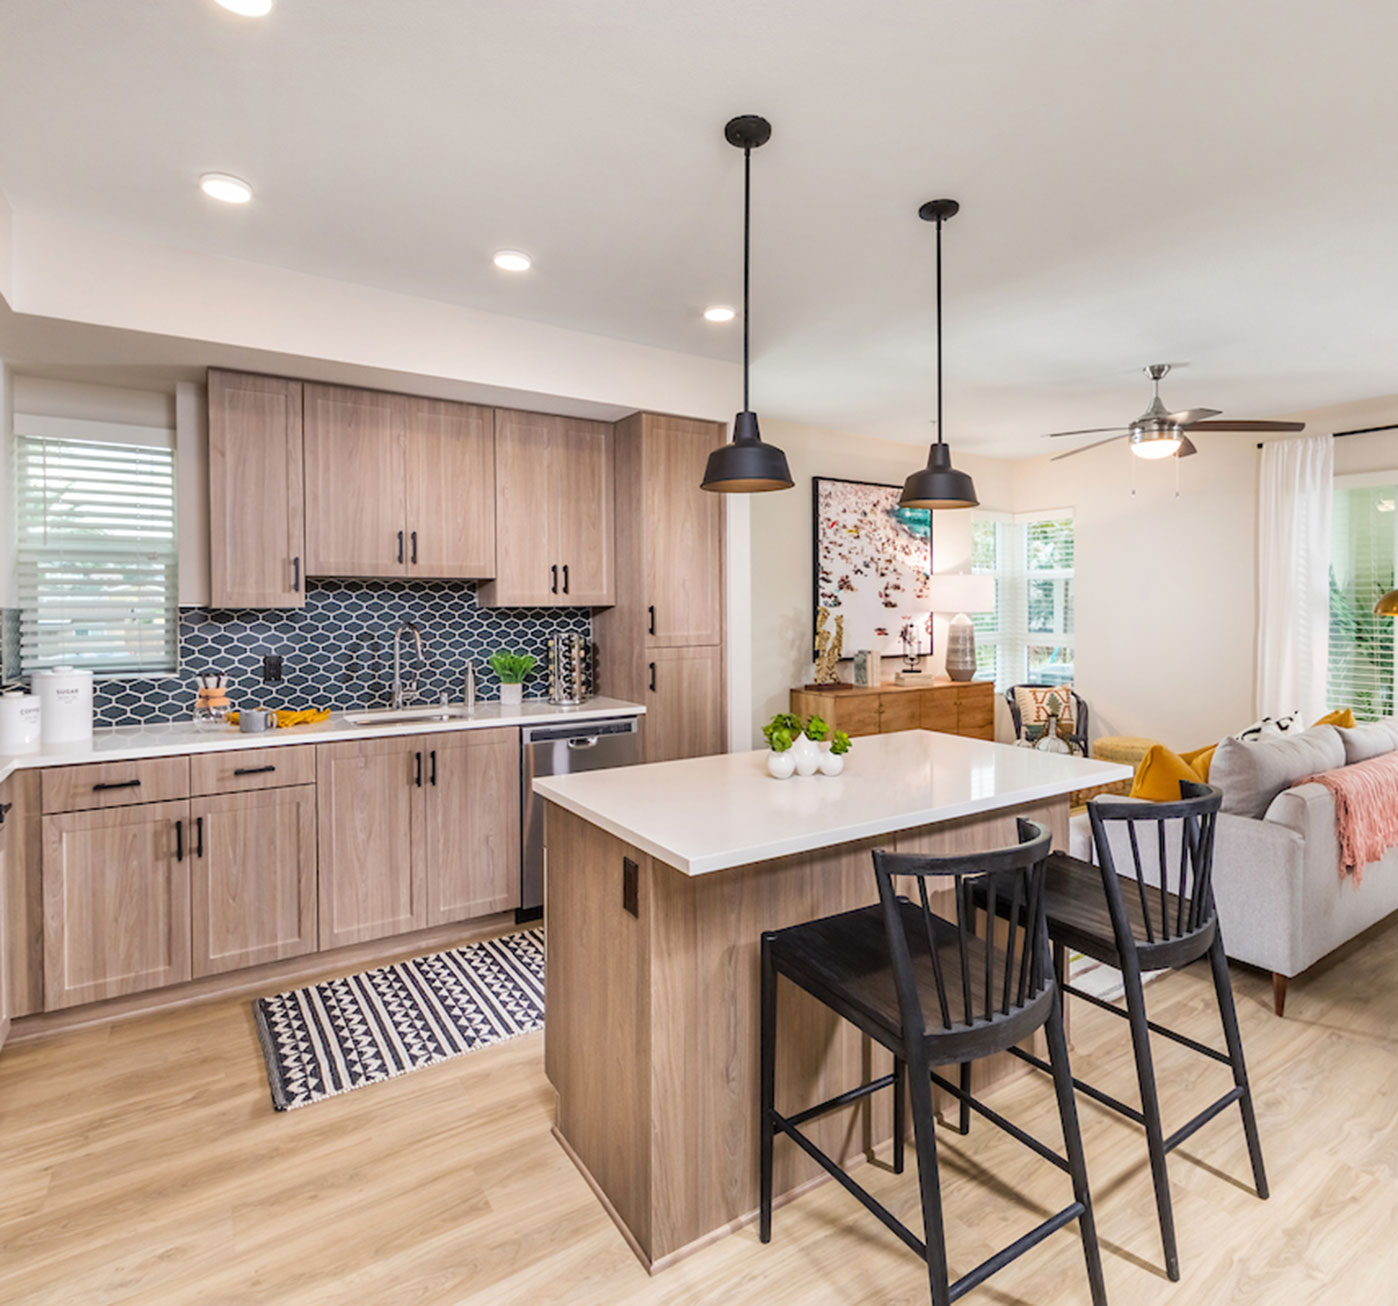 A bright kitchen with a kitchen island, stools, and wooden cabinets leads into the living room.